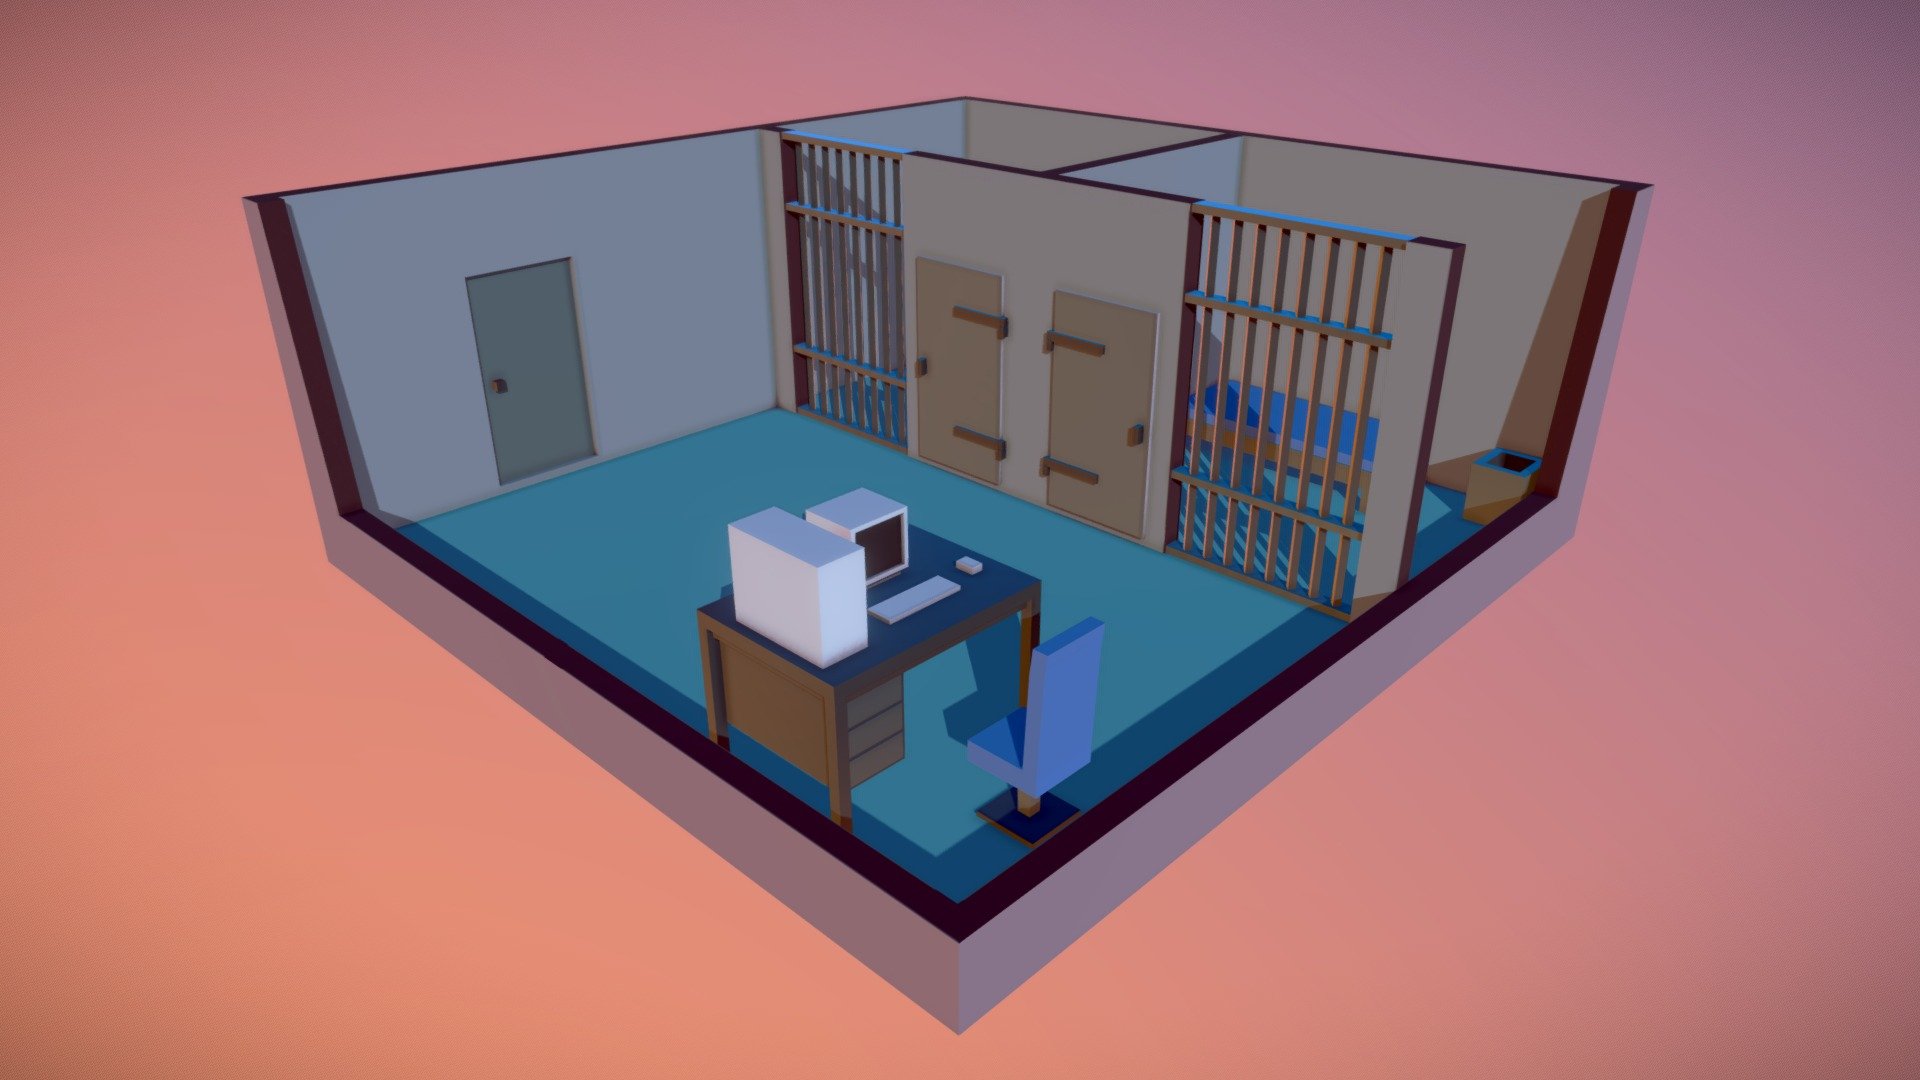 I enjoyed making the school so have a prison in the same style. Couldn't really figure out the colours but whatever. I'll probably make some more of these scenes! - Little Prison - 3D model by Fikhra 3d model